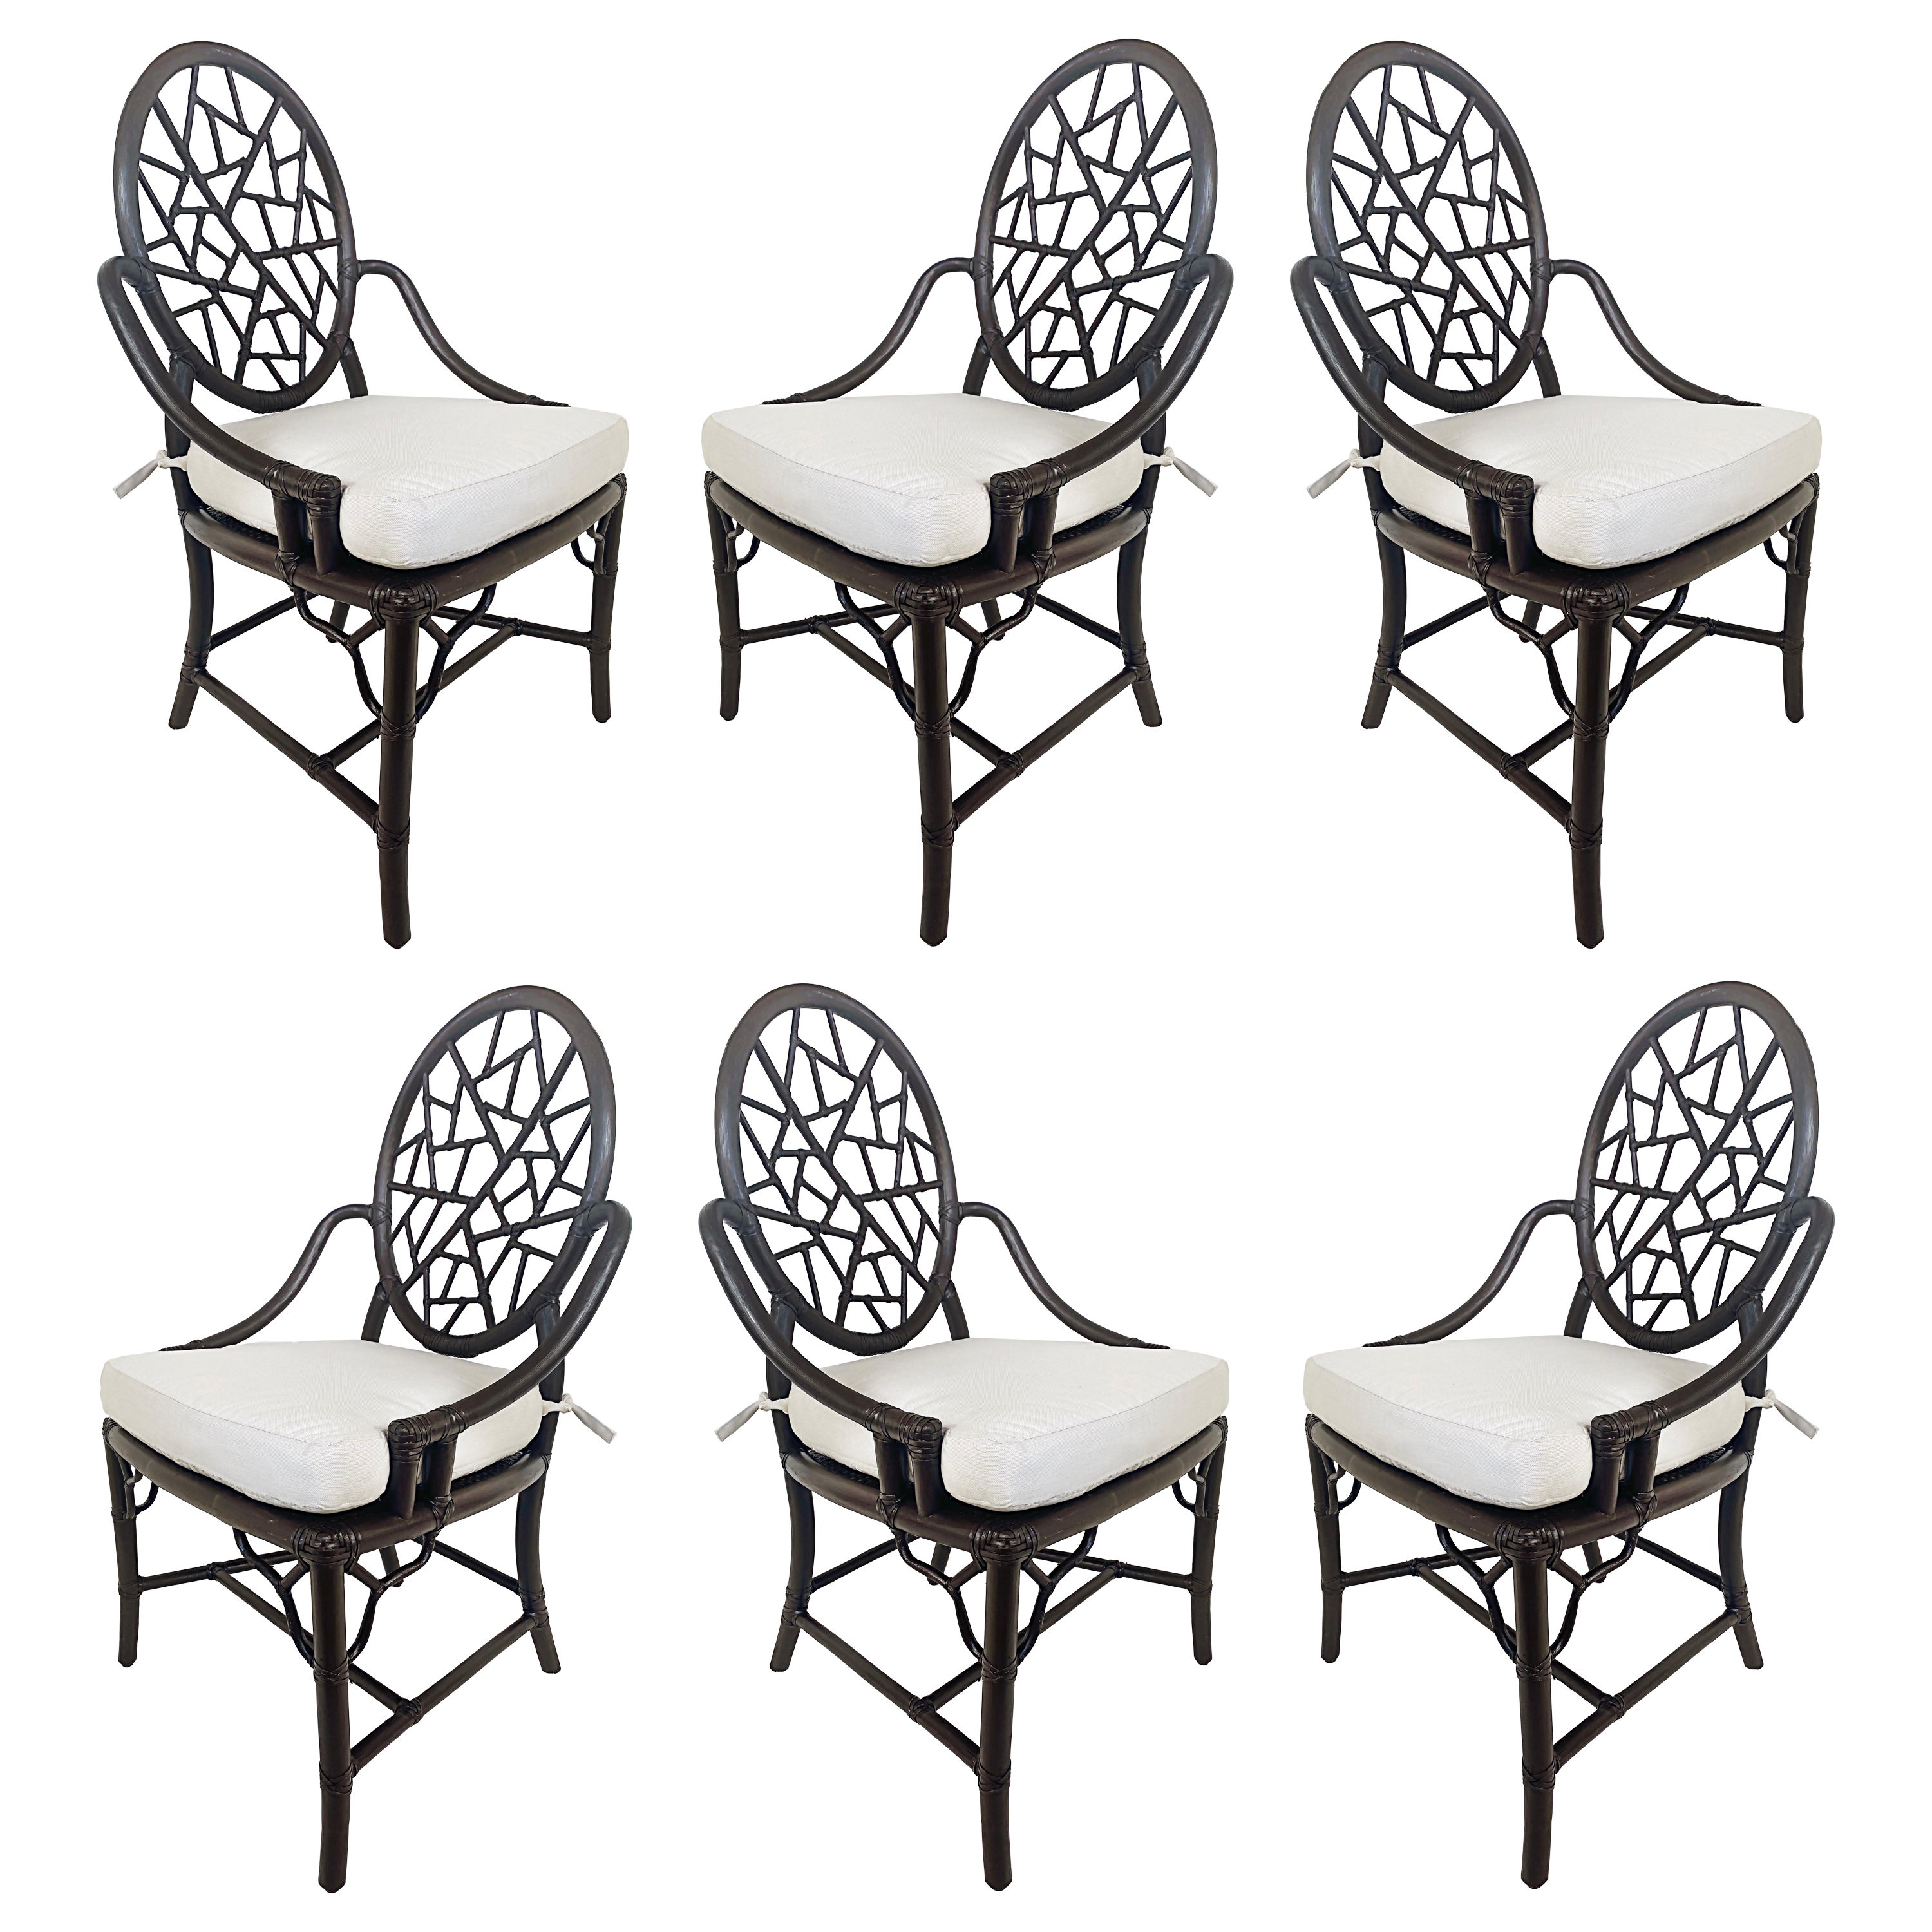 McGuire of San Francisco "Cracked Ice" Dining Chairs, Set of Six